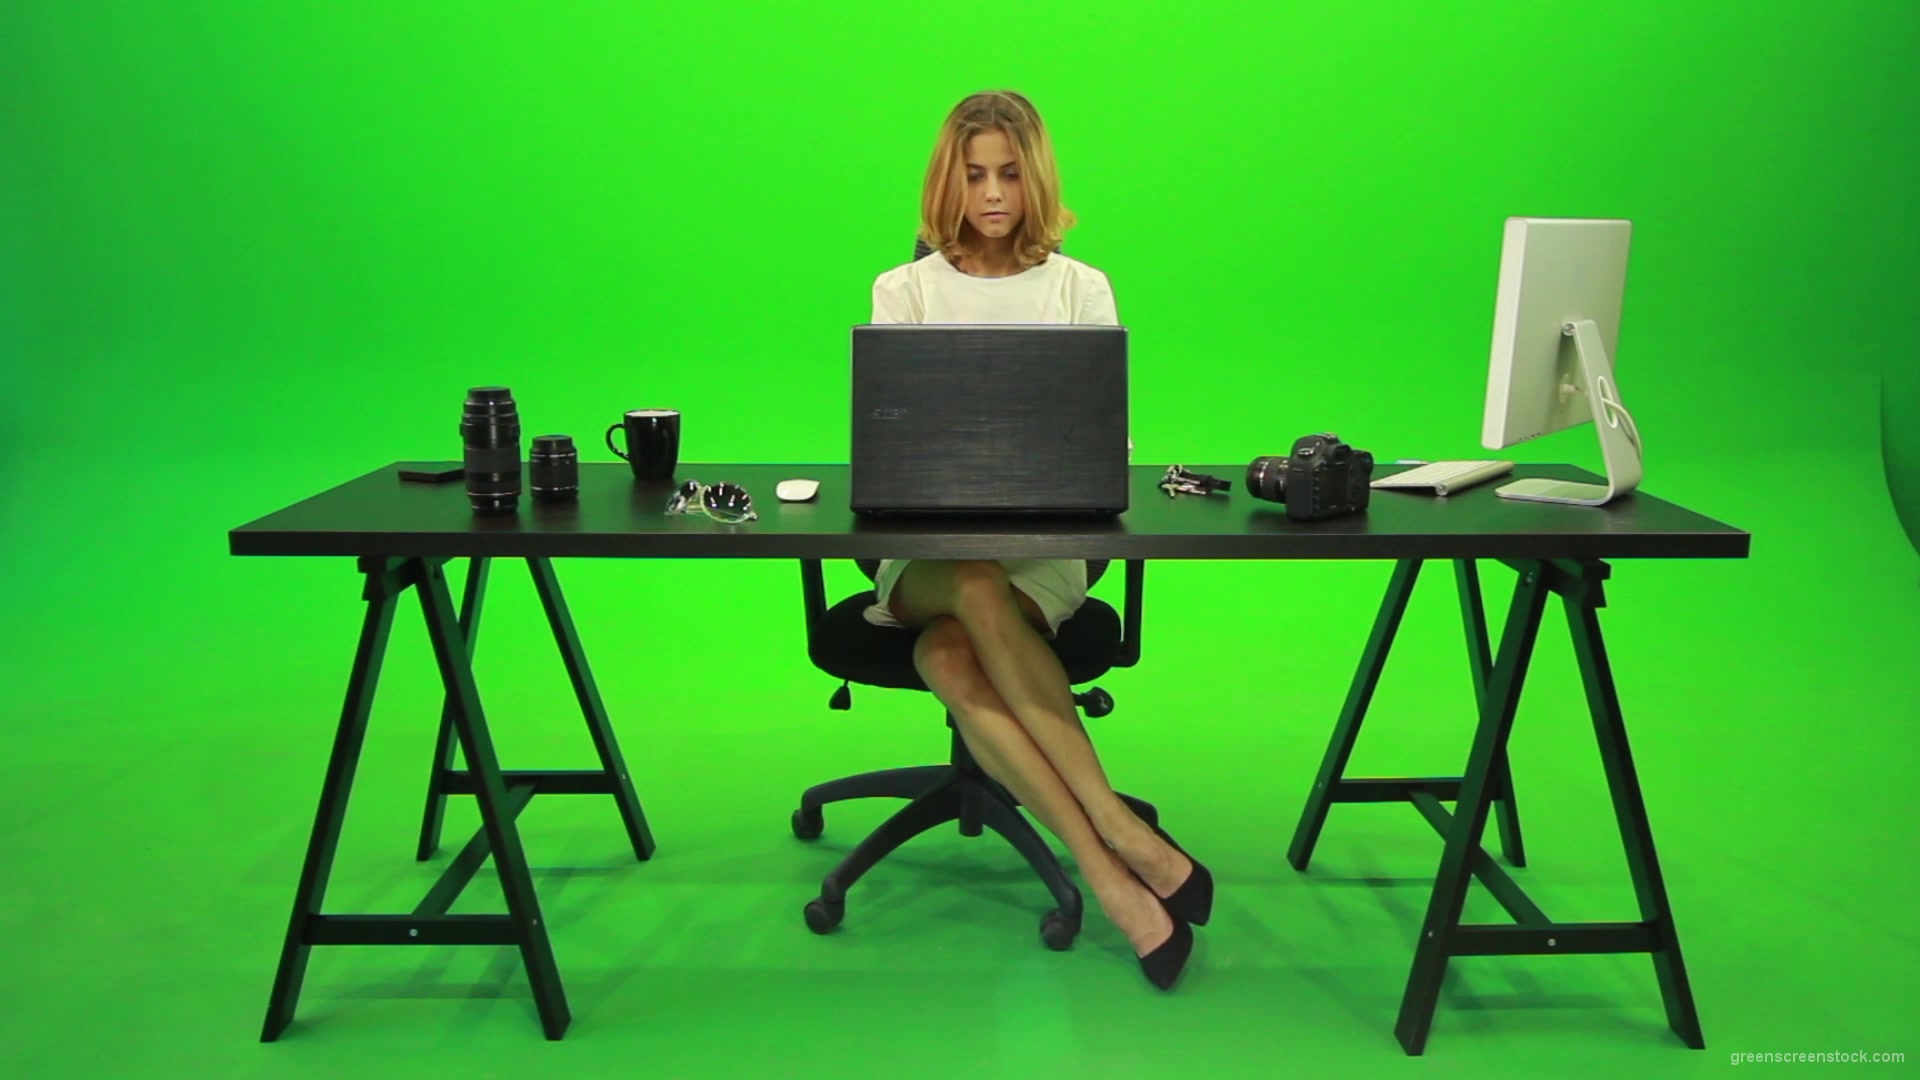 Business-Woman-Working-in-the-Office-2-Green-Screen-Footage_006 Green Screen Stock